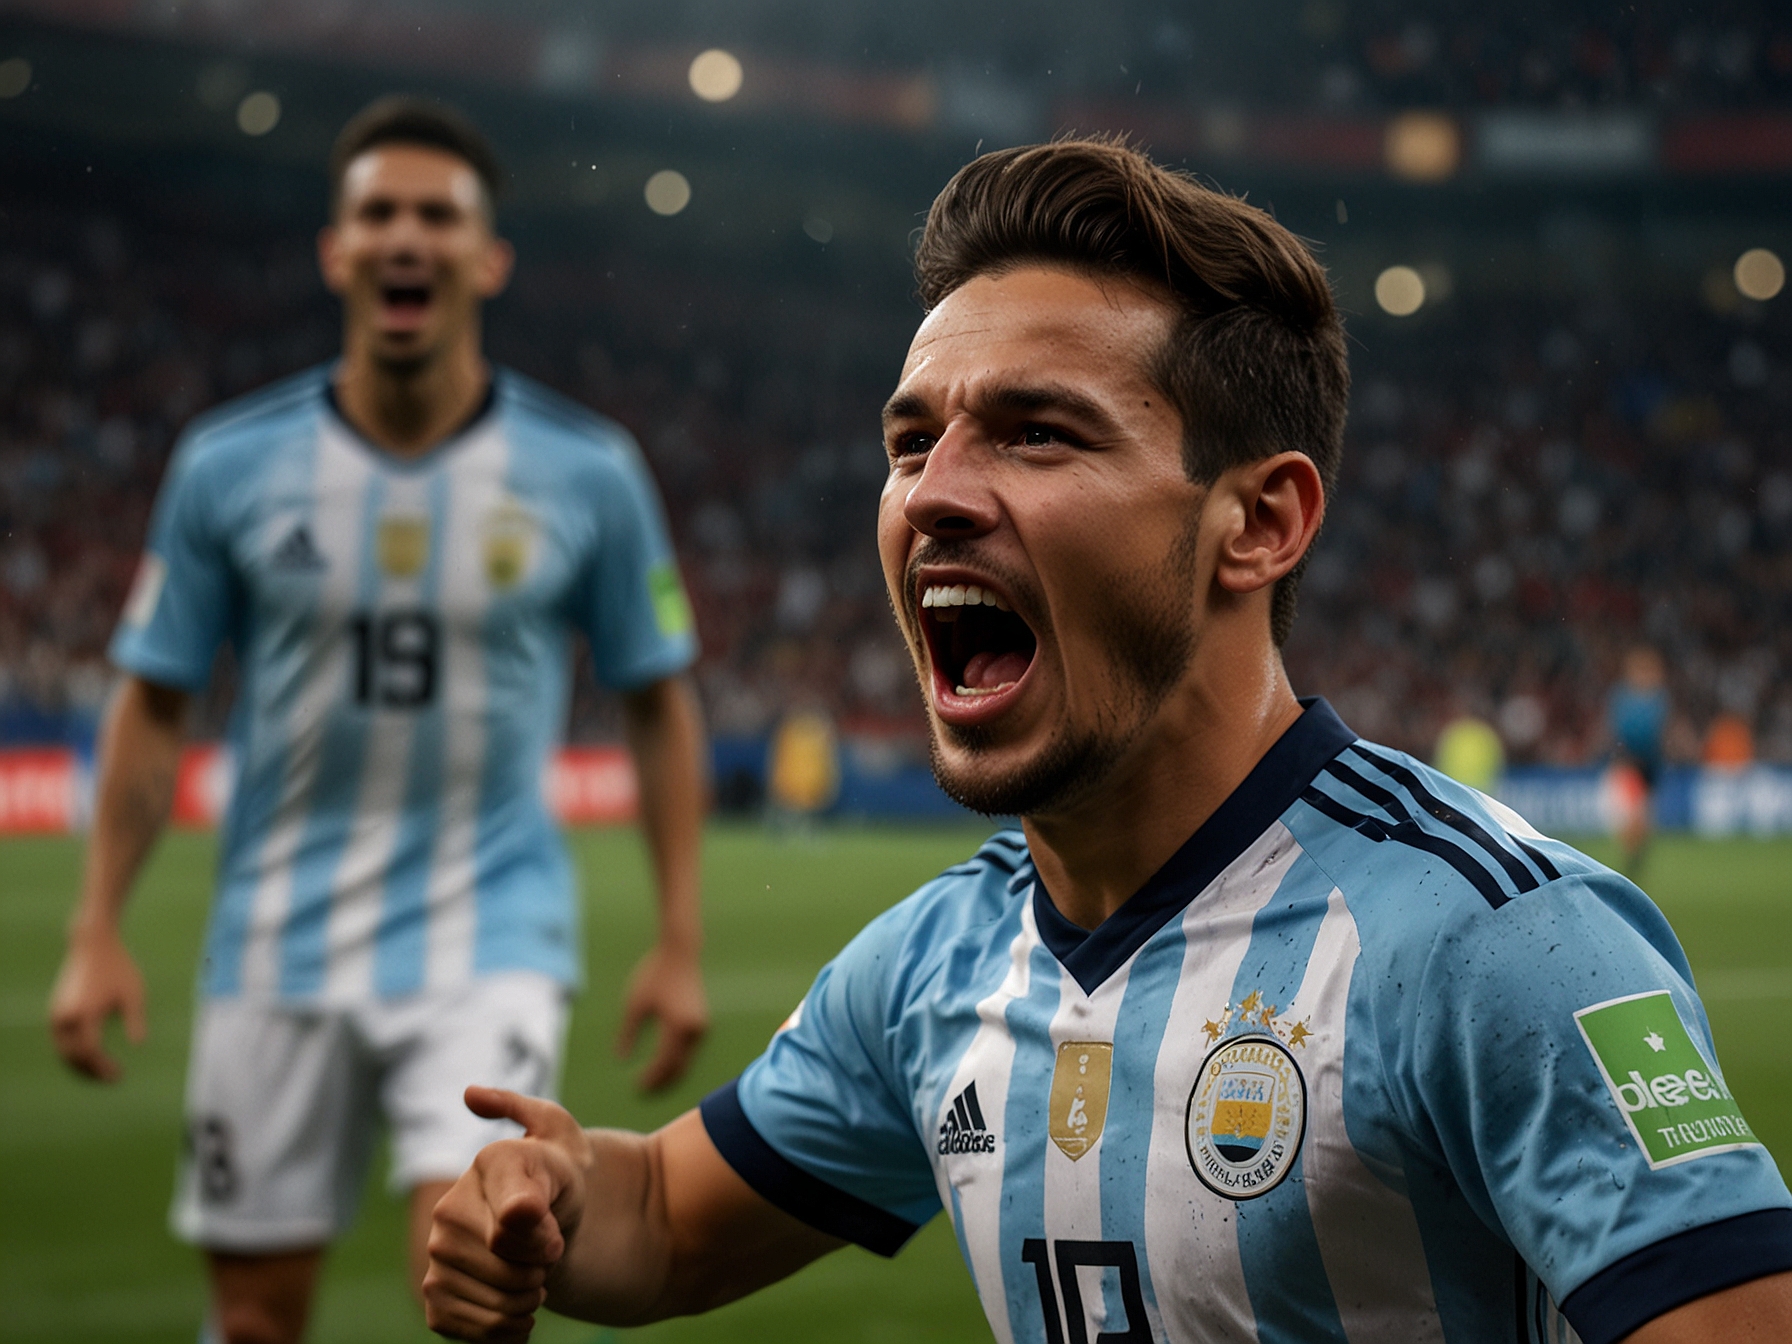 Julian Alvarez celebrates after scoring the opening goal for Argentina in the Copa America match, breaking the deadlock early in the second half and shifting the game’s momentum.